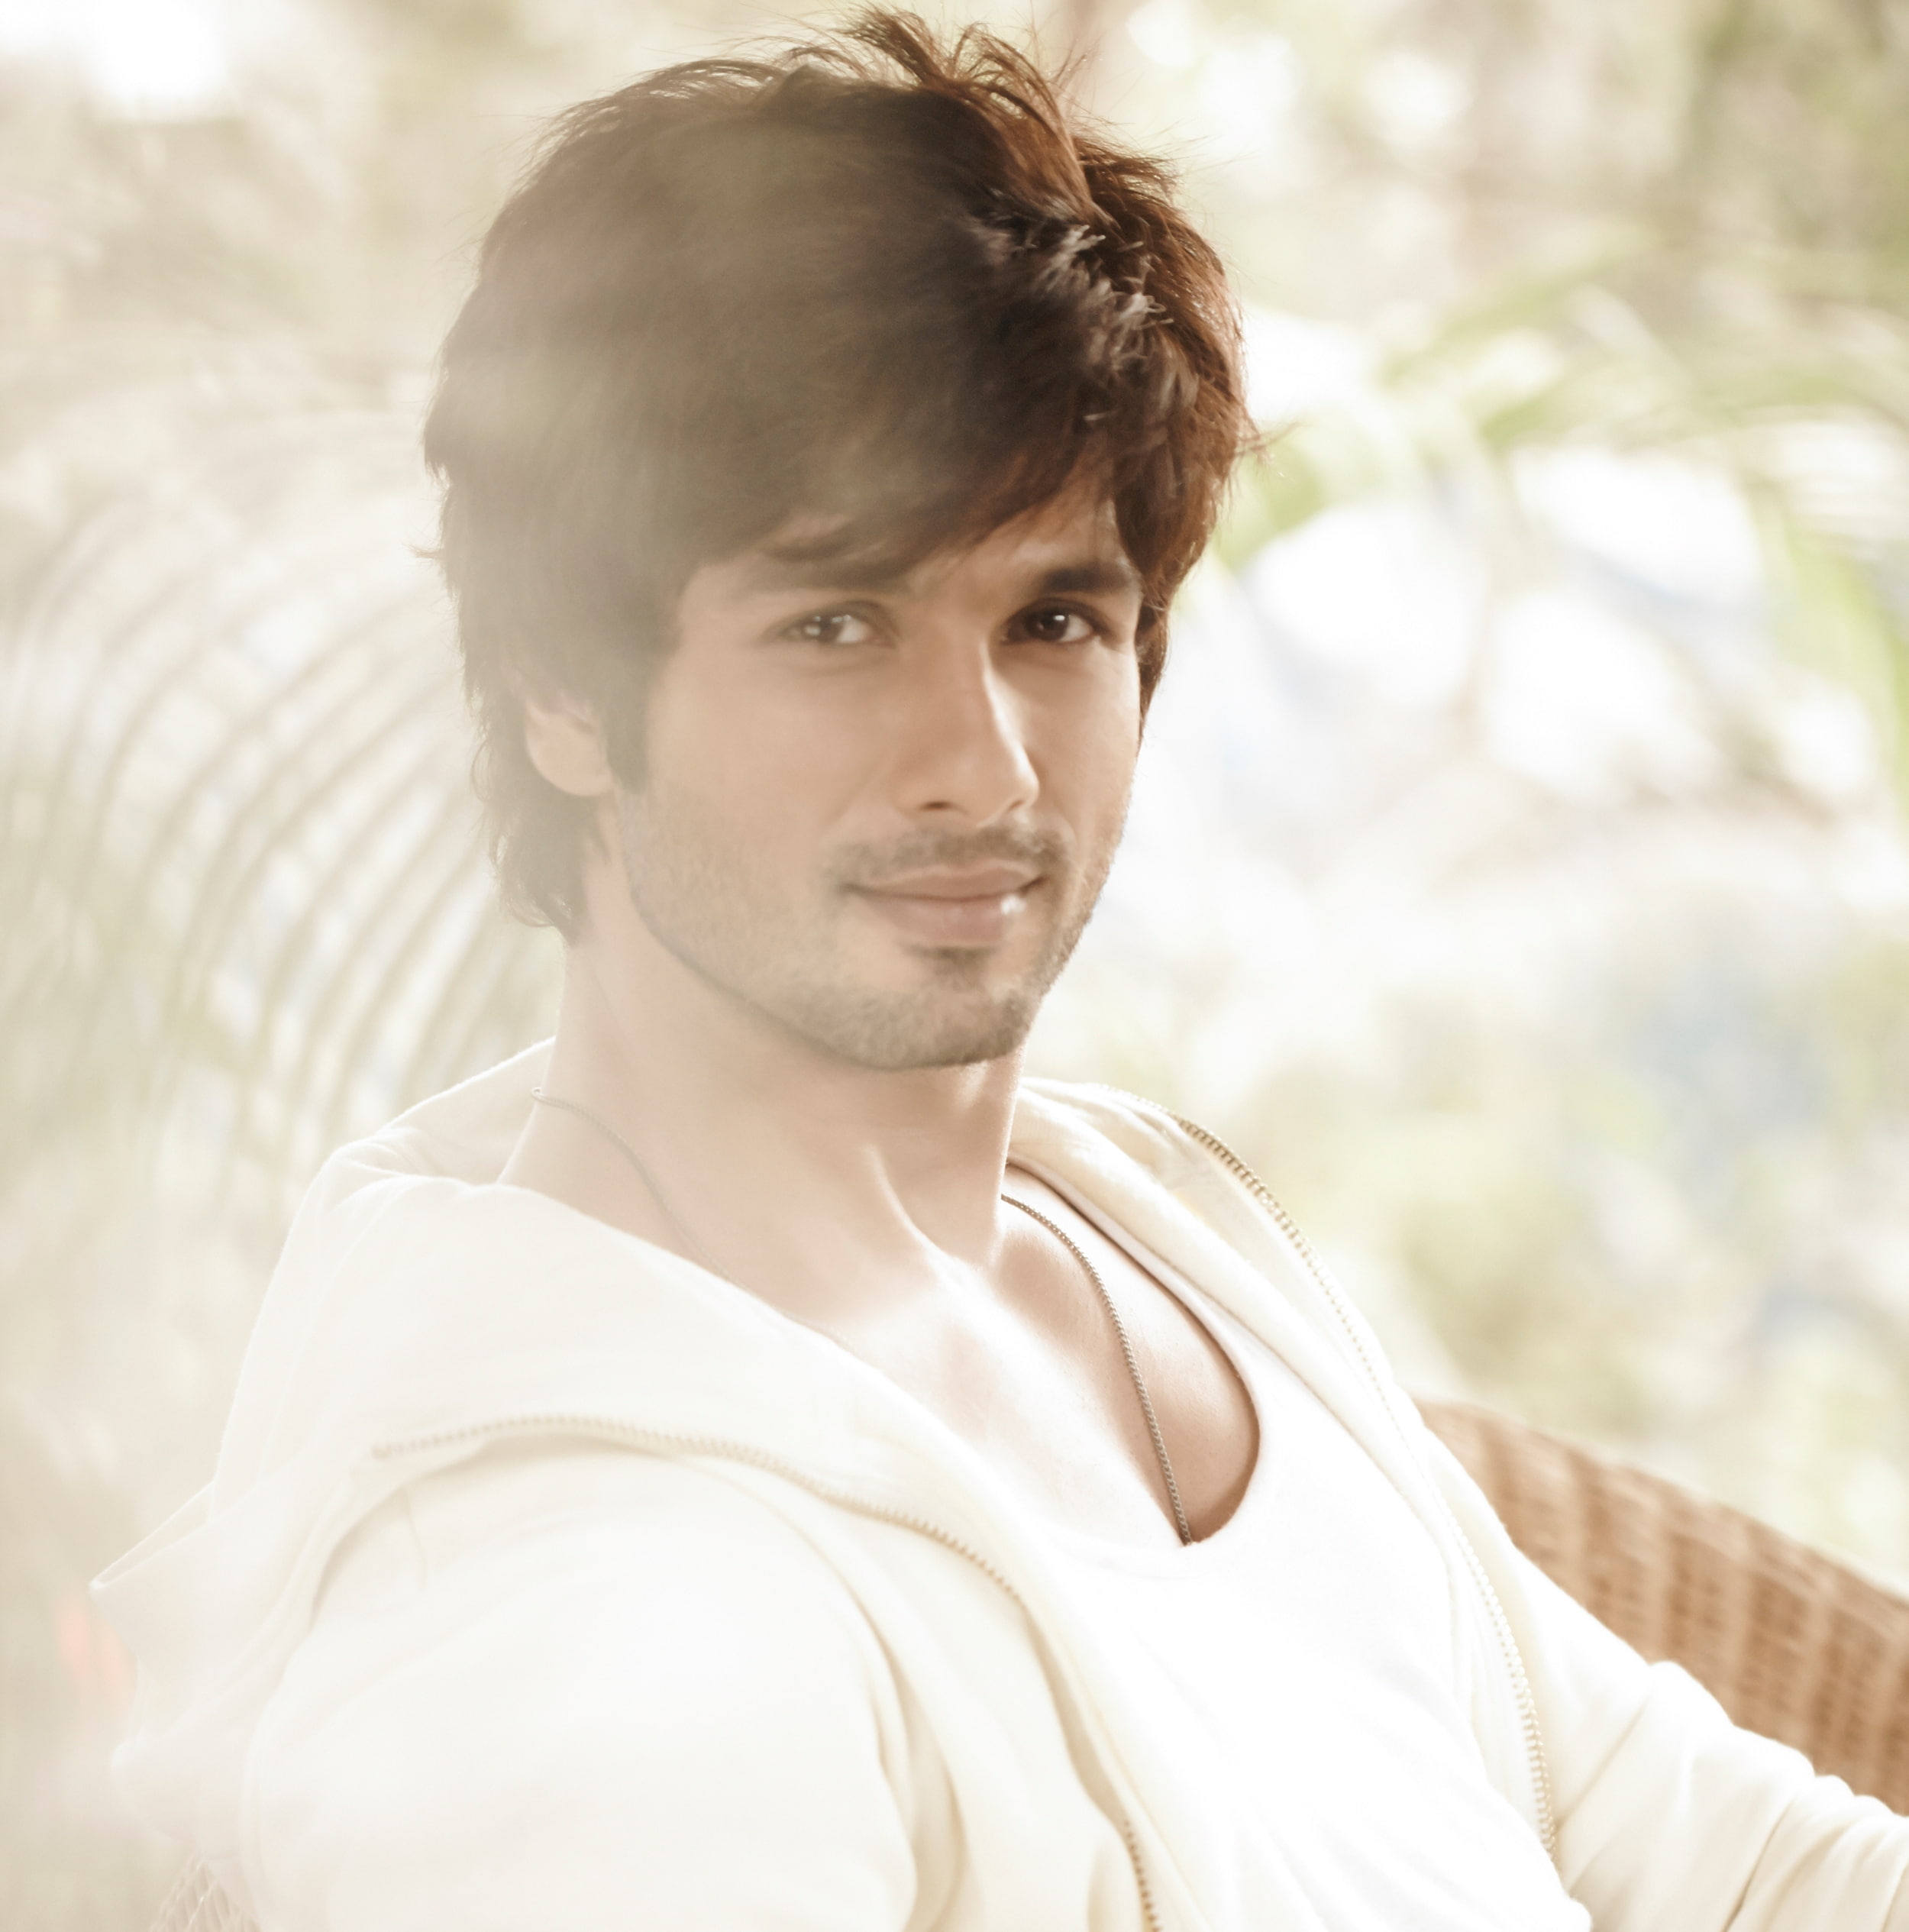 Shahid Kapoor Awesome Hair Style  Photoshoot, portrait, one person